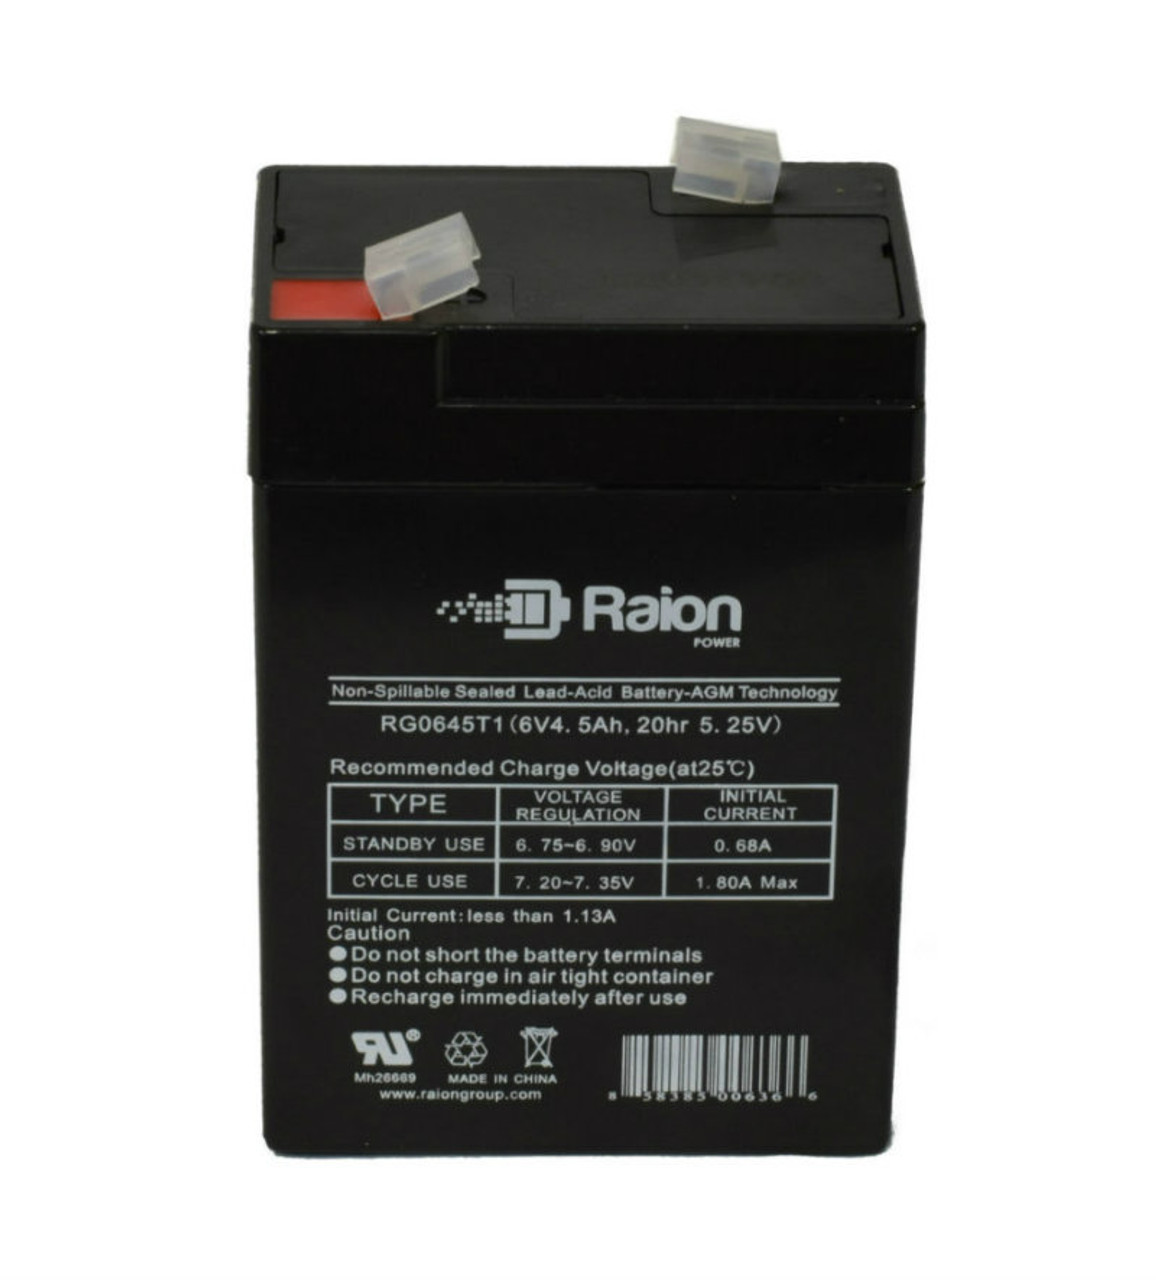 Raion Power RG0645T1 Replacement Battery Cartridge for MHB MS5-6